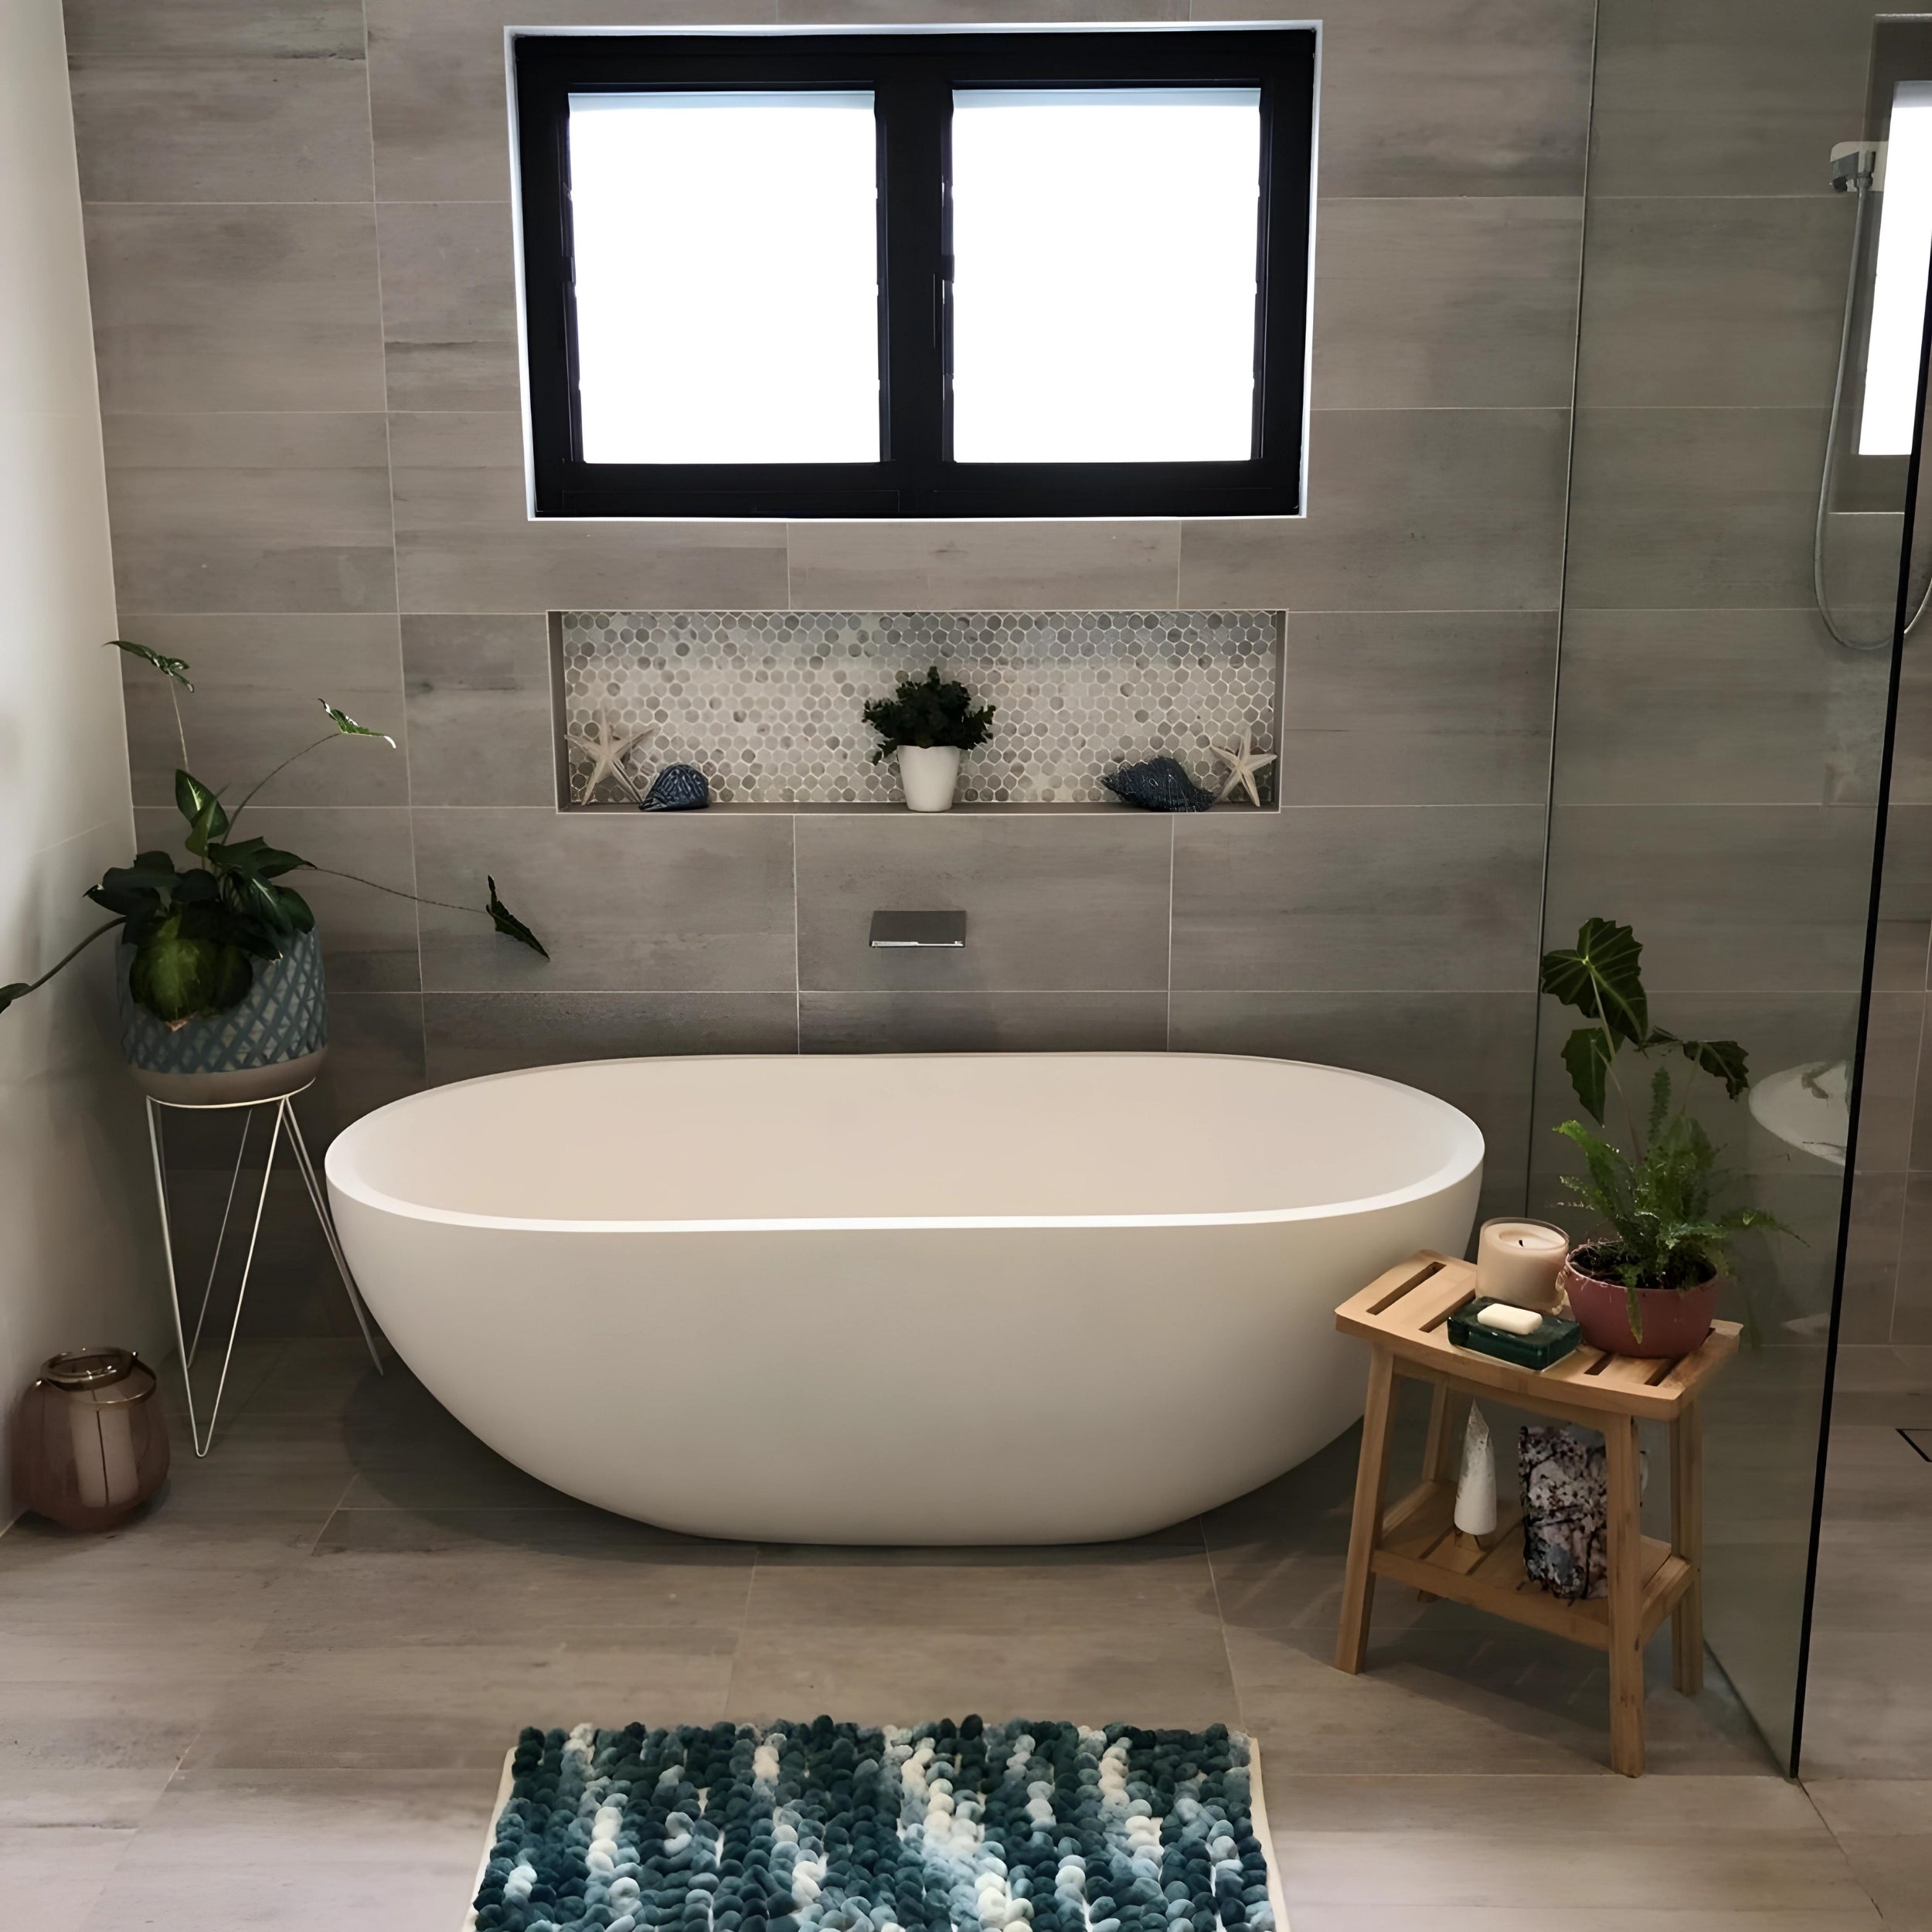 PIETRA BIANCA BELLA MODERN FREESTANDING STONE BATHTUB WITH MULTICOLOUR (AVAILABLE IN 1500MM, 1600MM, 1700MM AND 1800MM)